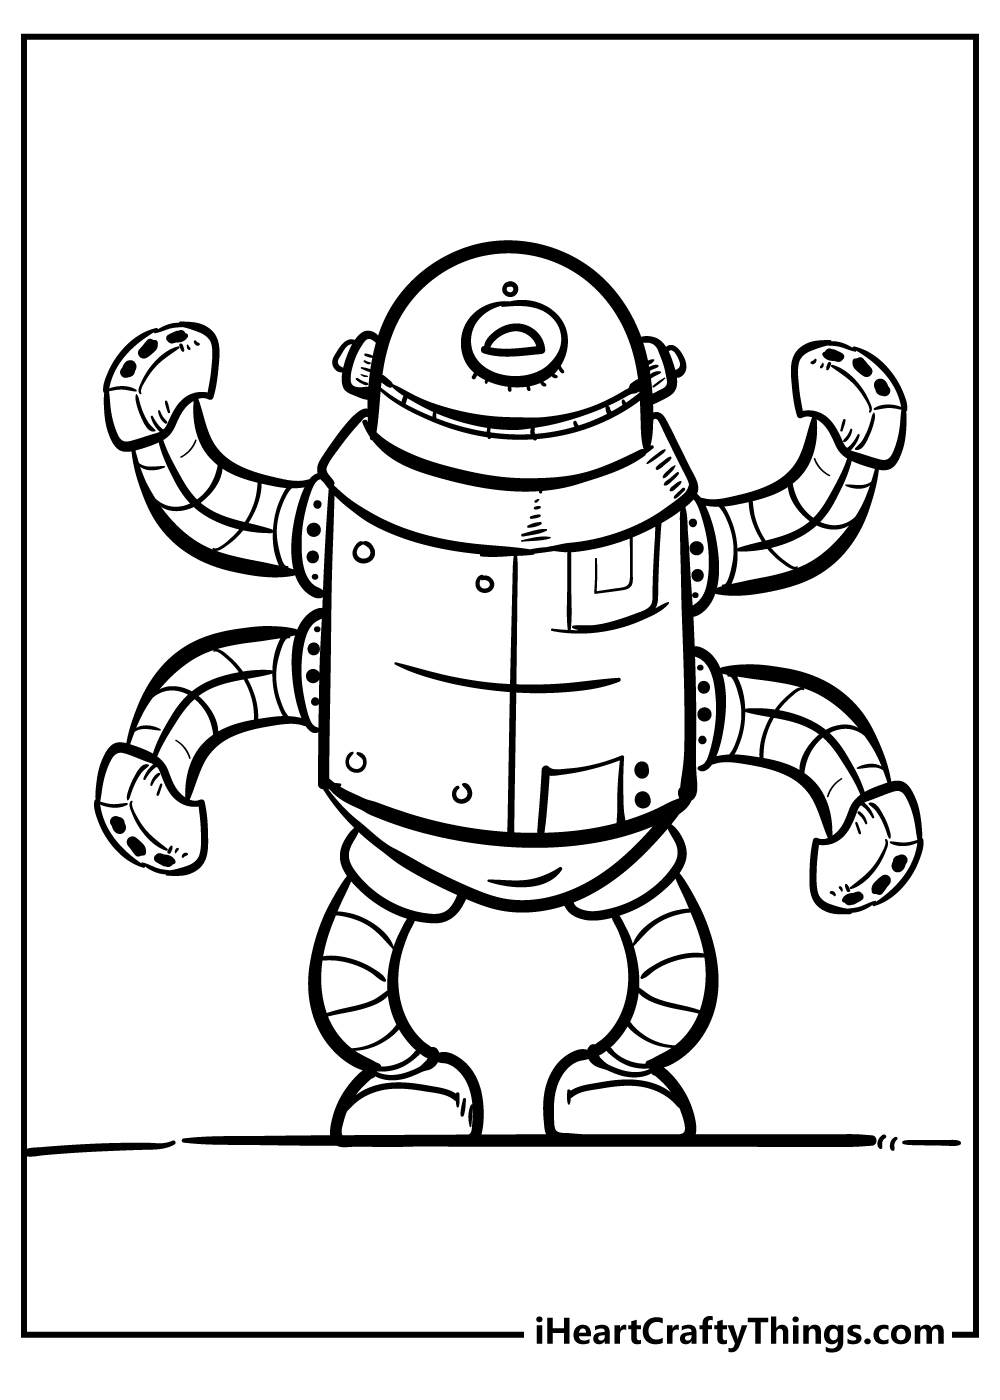 Robot coloring pages free printable